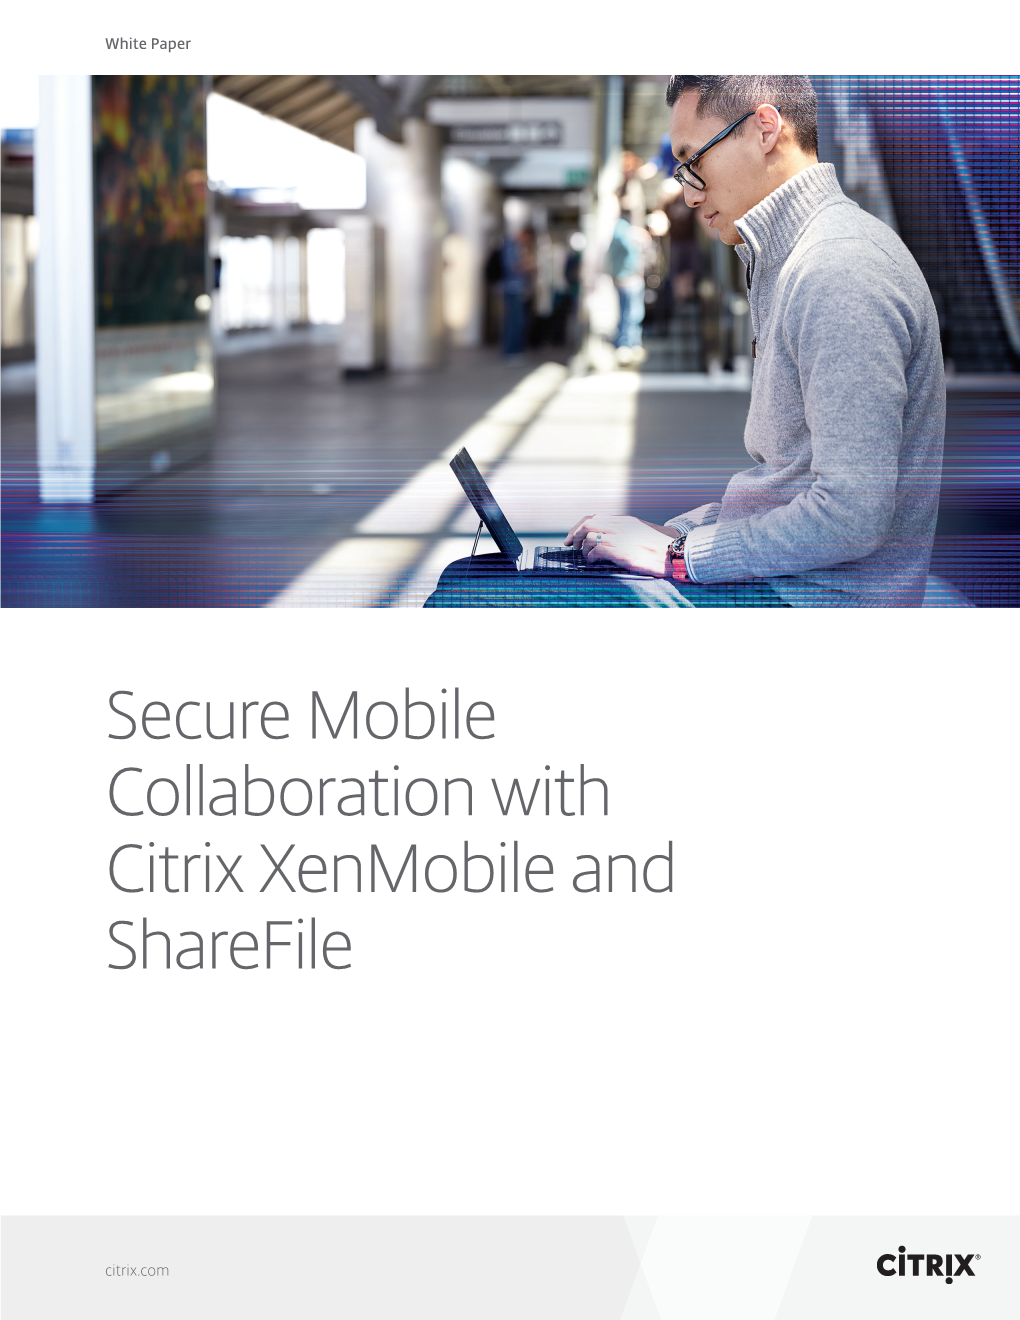 Secure Mobile Collaboration with Citrix Xenmobile and Sharefile